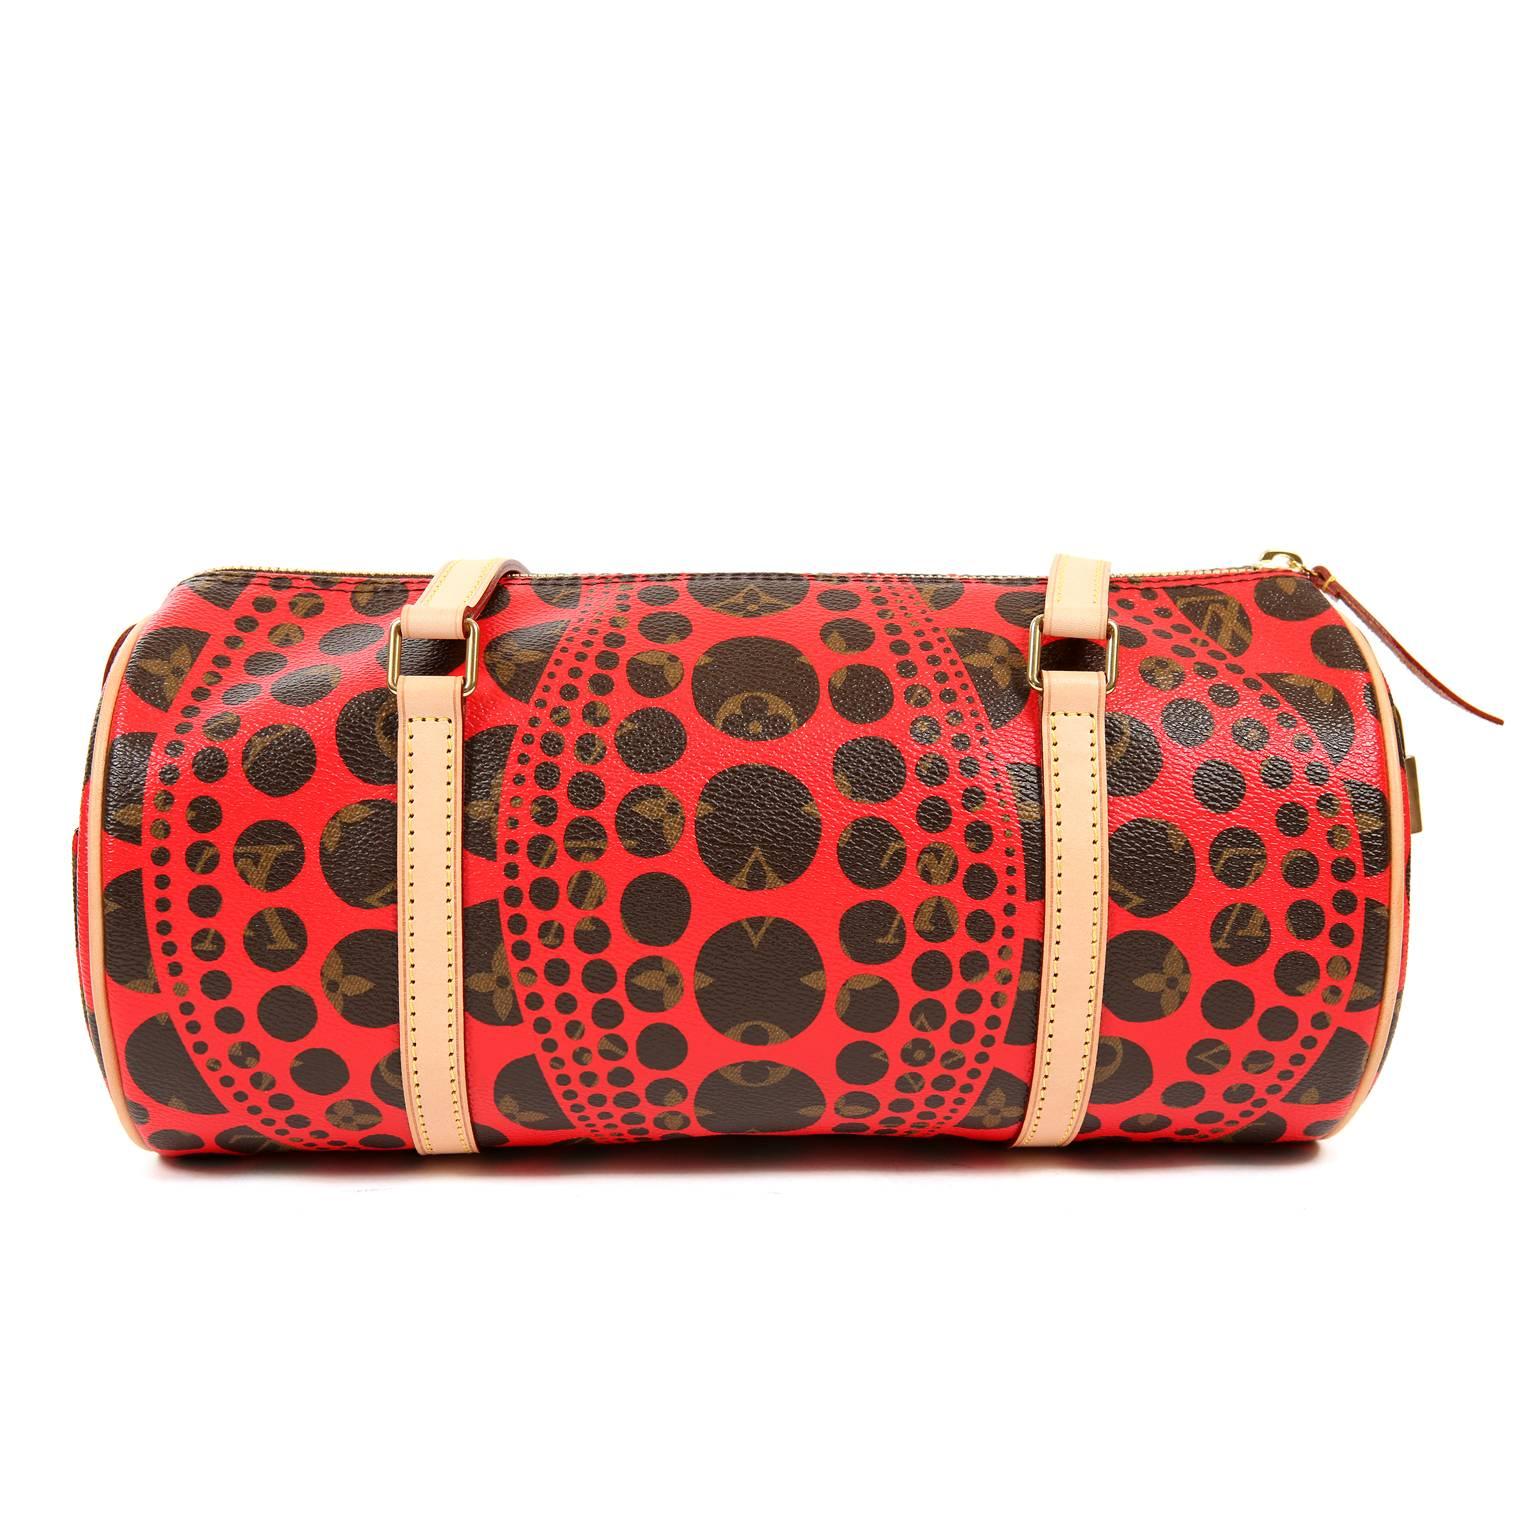 This authentic Louis Vuitton Neo Pumpkin Dots Papillon is a limited edition collectible that has never been carried- brand new. Designed by artist Yayoi Kusama, it features the signature Louis Vuitton monogram with a unique red dot overlay pattern. 